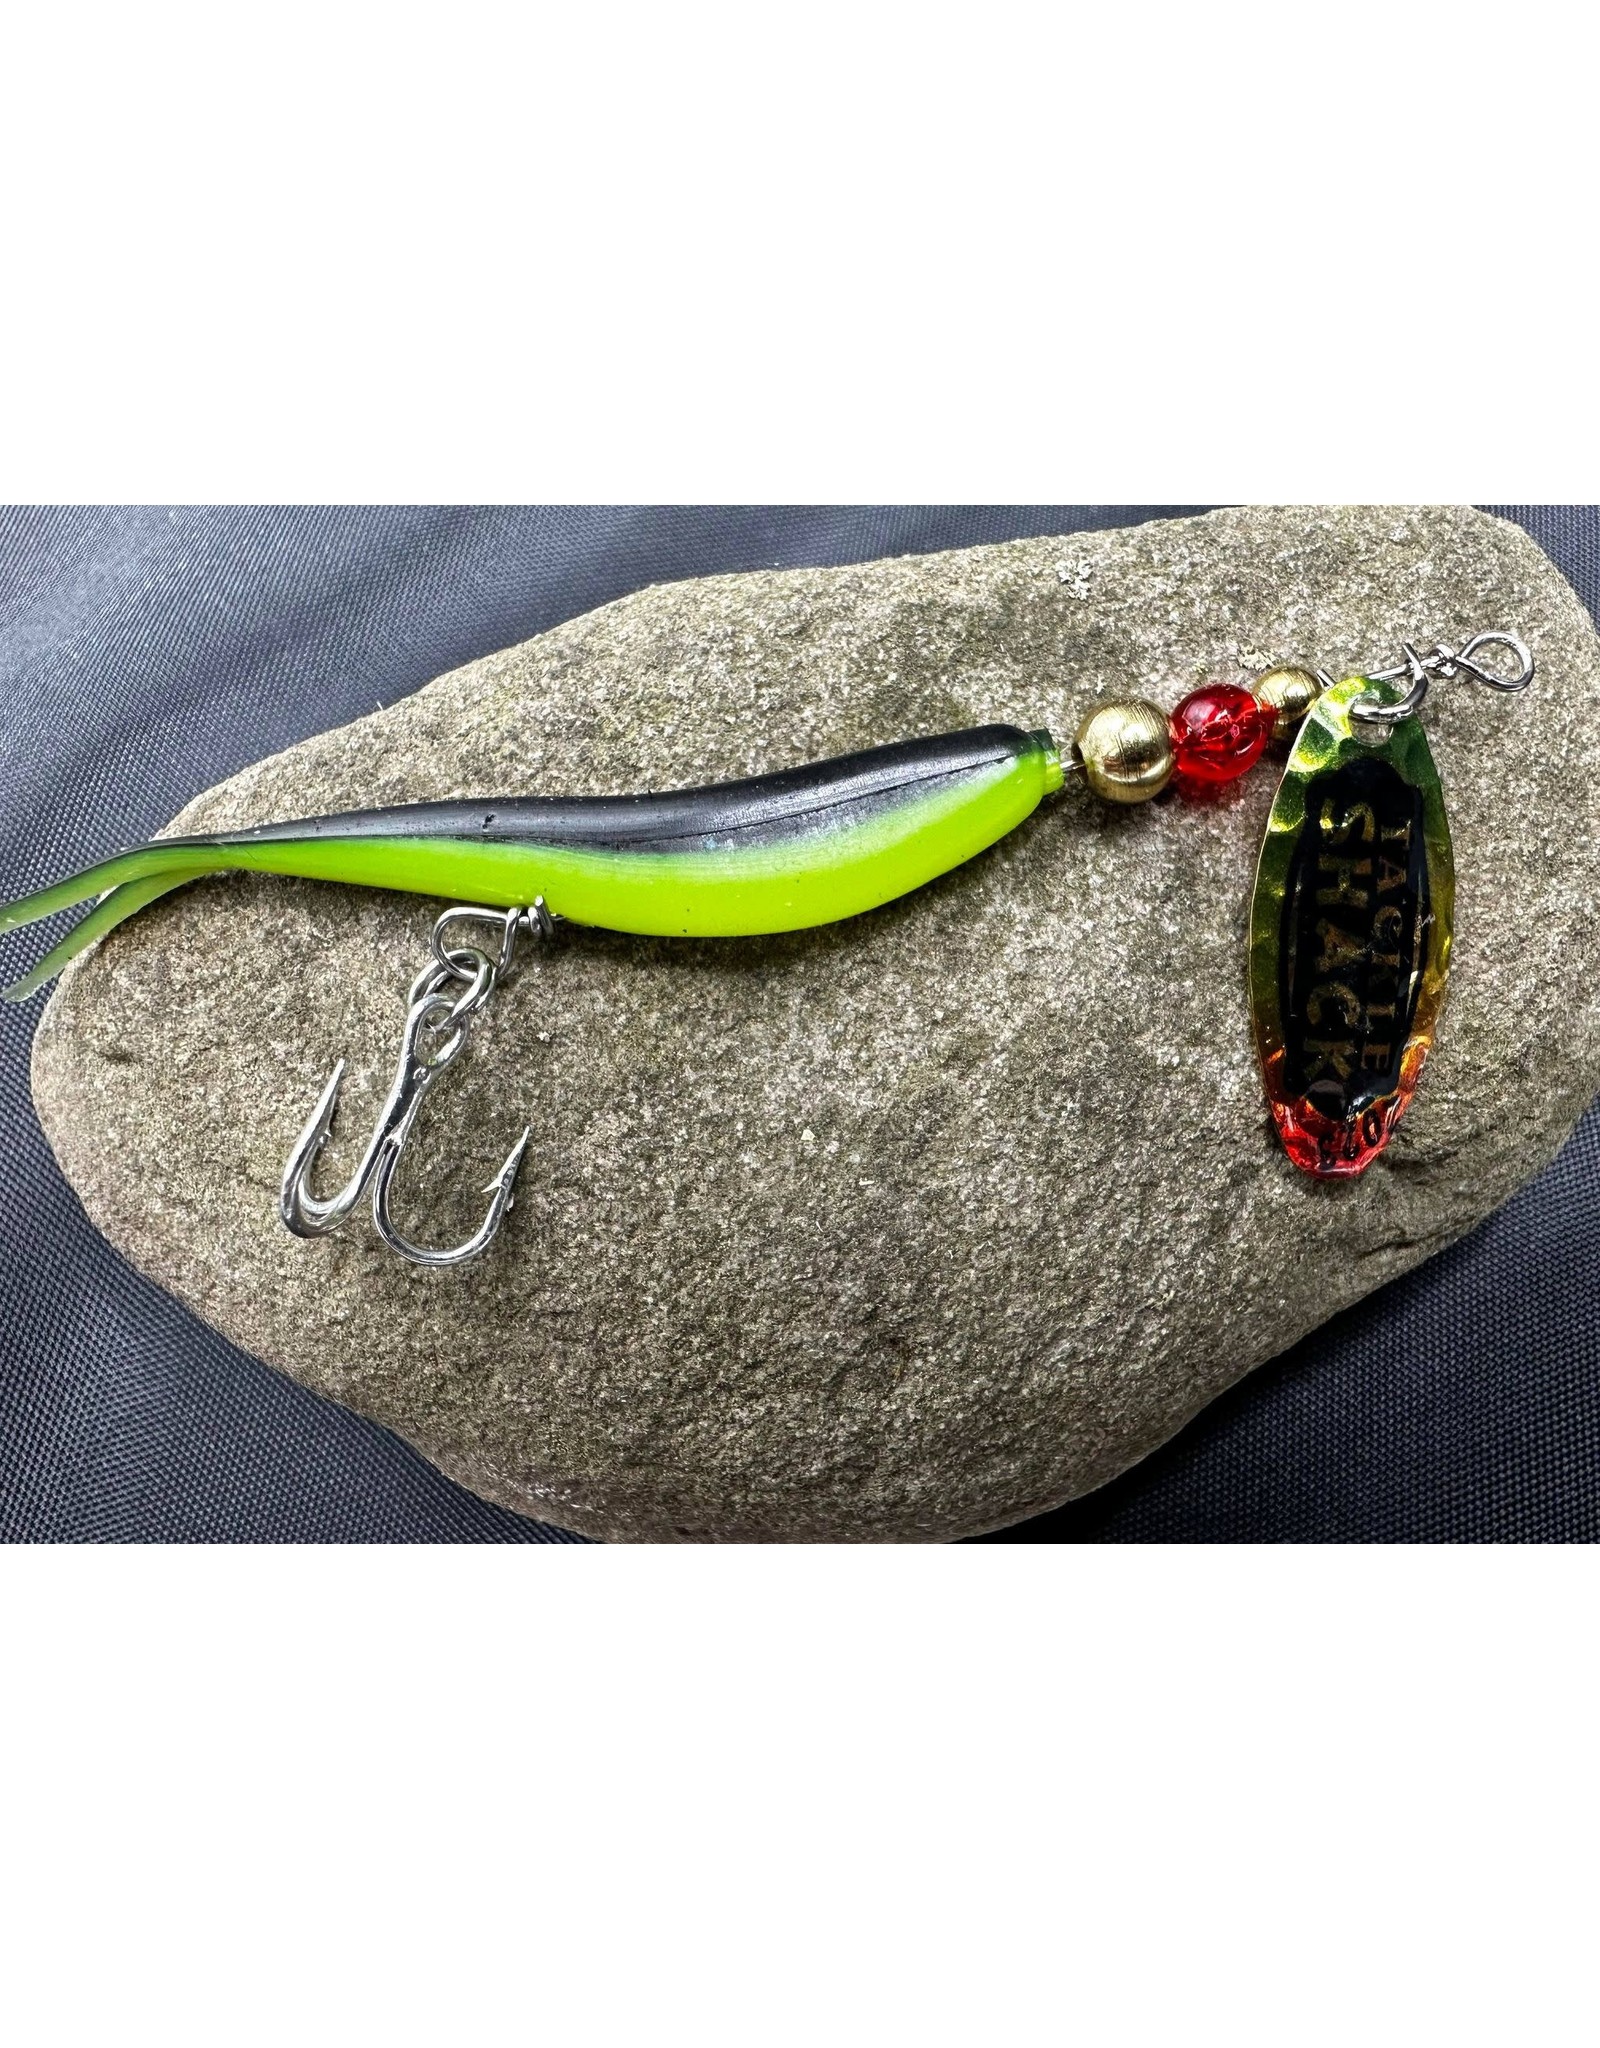 TK Tackle Tackle Shack Limited Edition 2023 Minnow Spinner